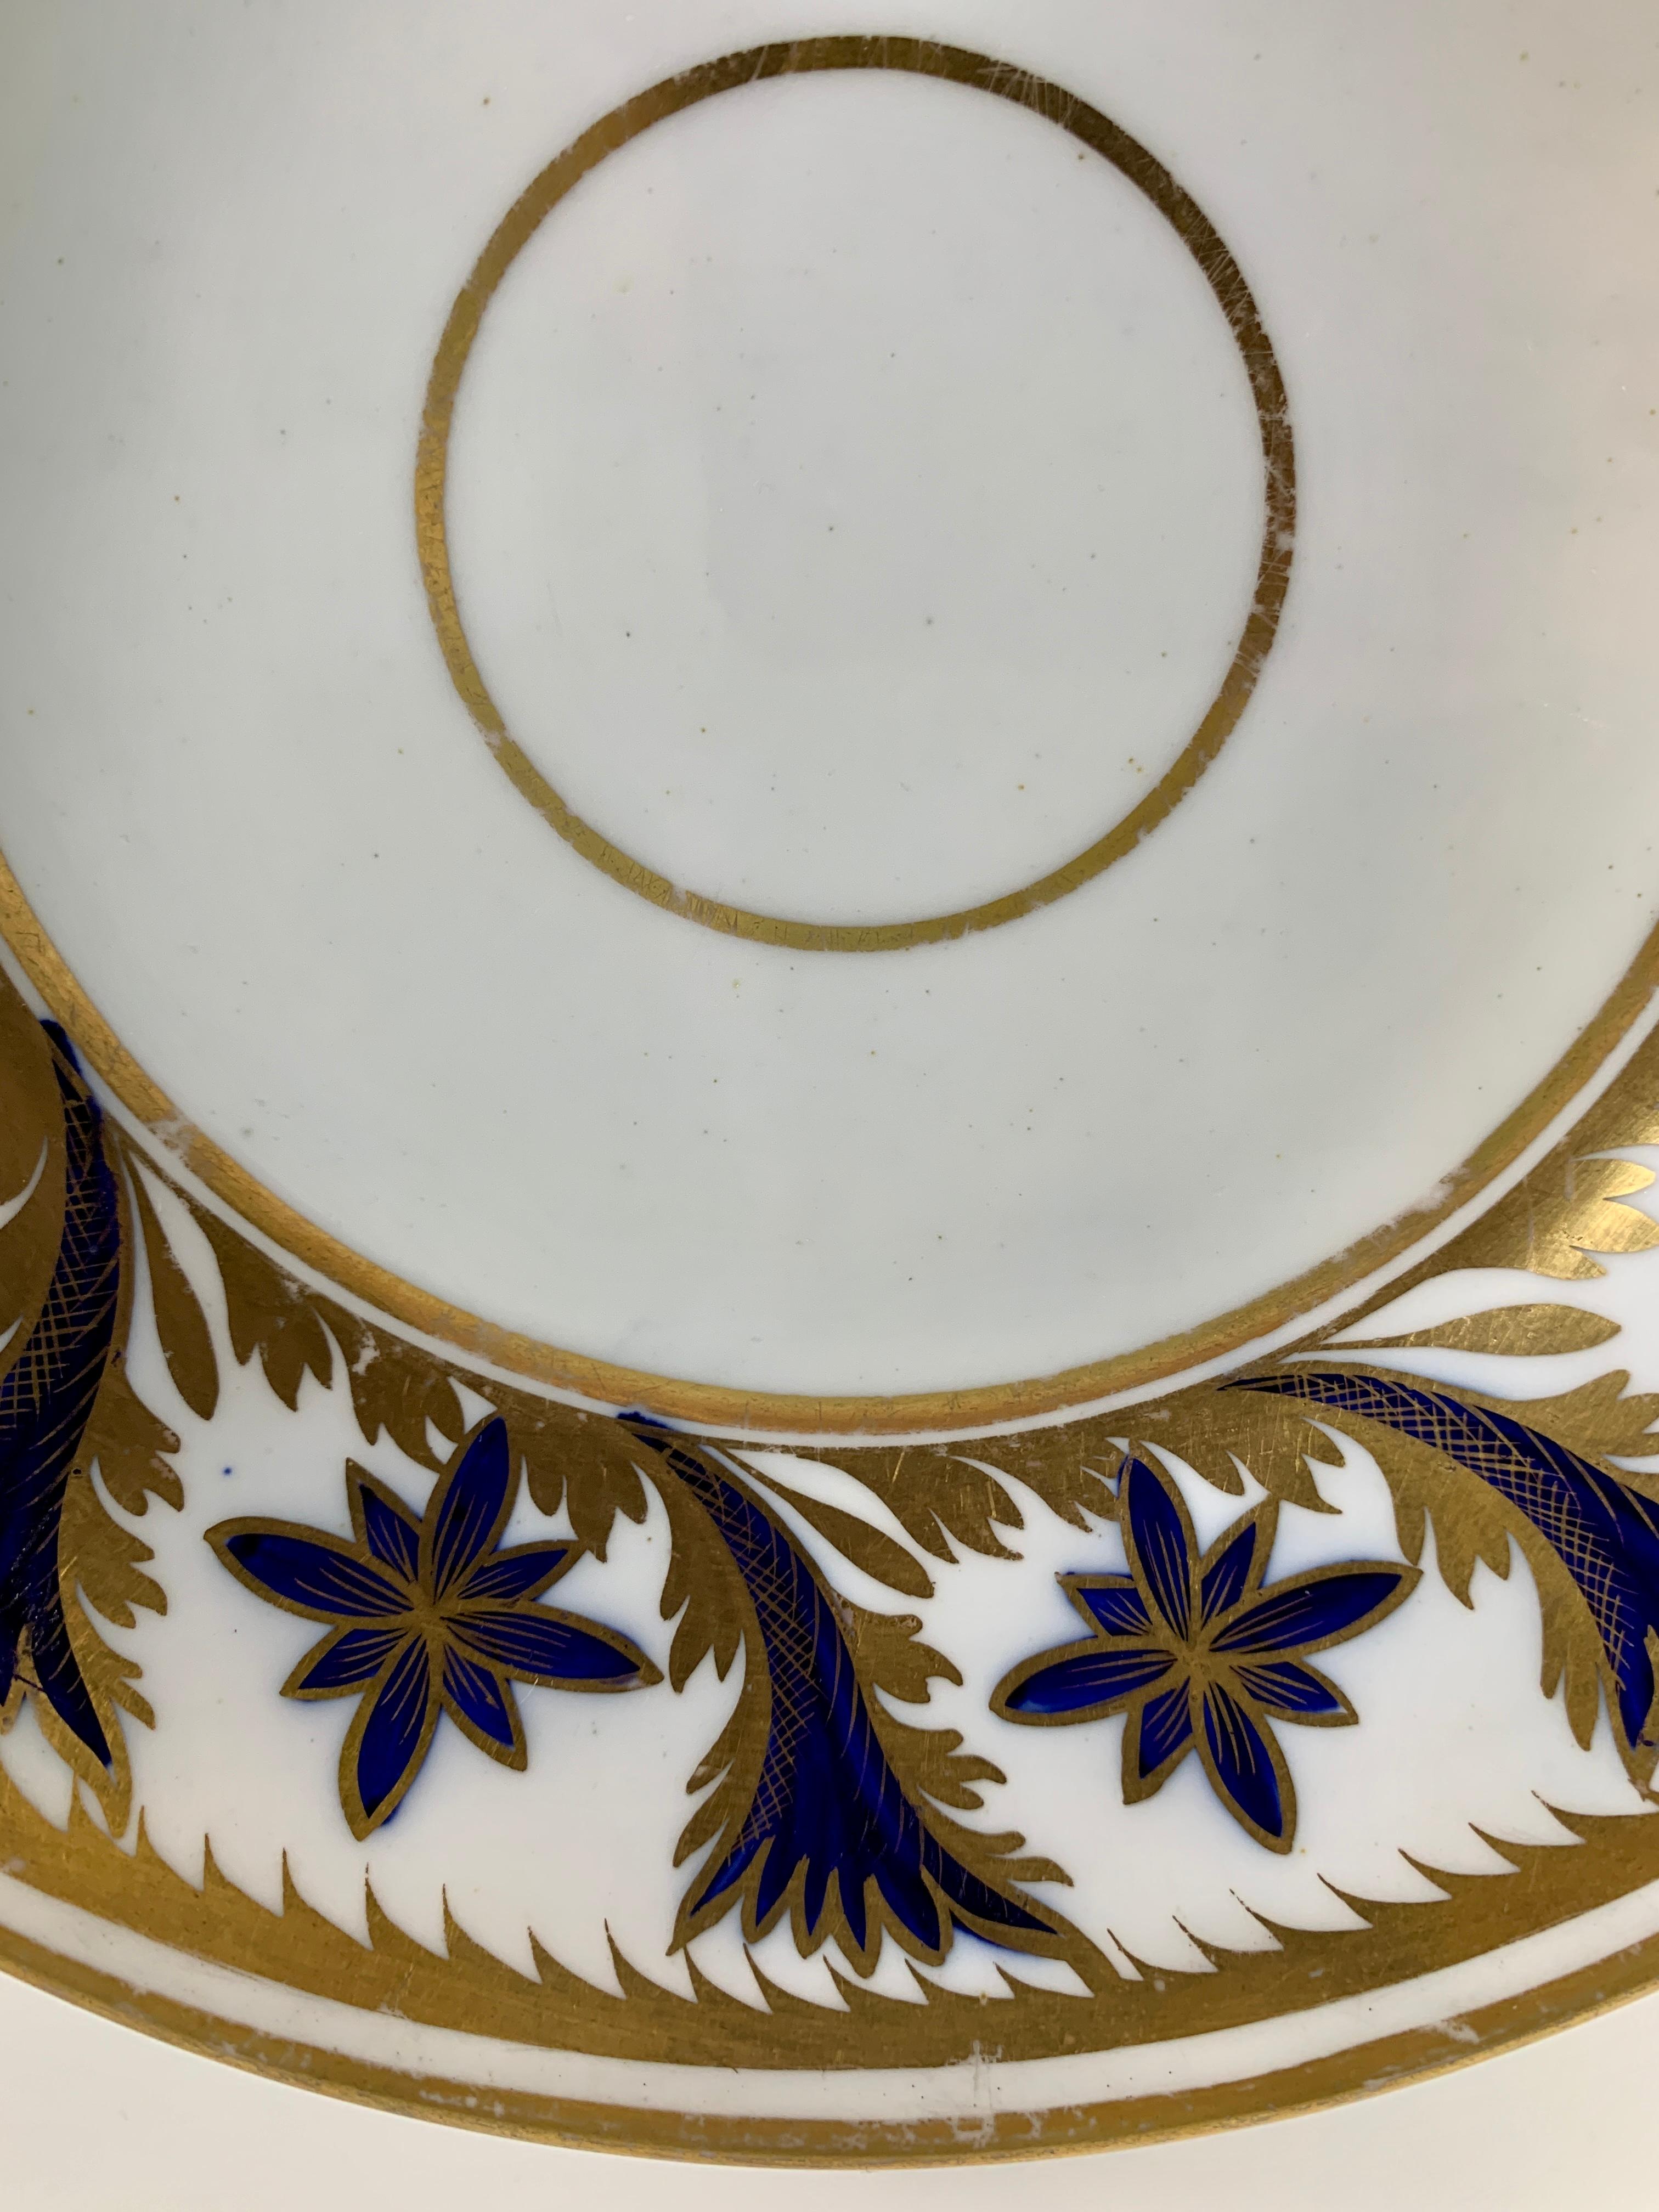 Provenance: The Private Collection of Mario Buatta
A Coalport dish with beautiful cobalt blue and gold decoration on a wide border. 
Made in England circa 1820, the dish is hand-painted and hand-gilded. 
The painter and gilder would have used a